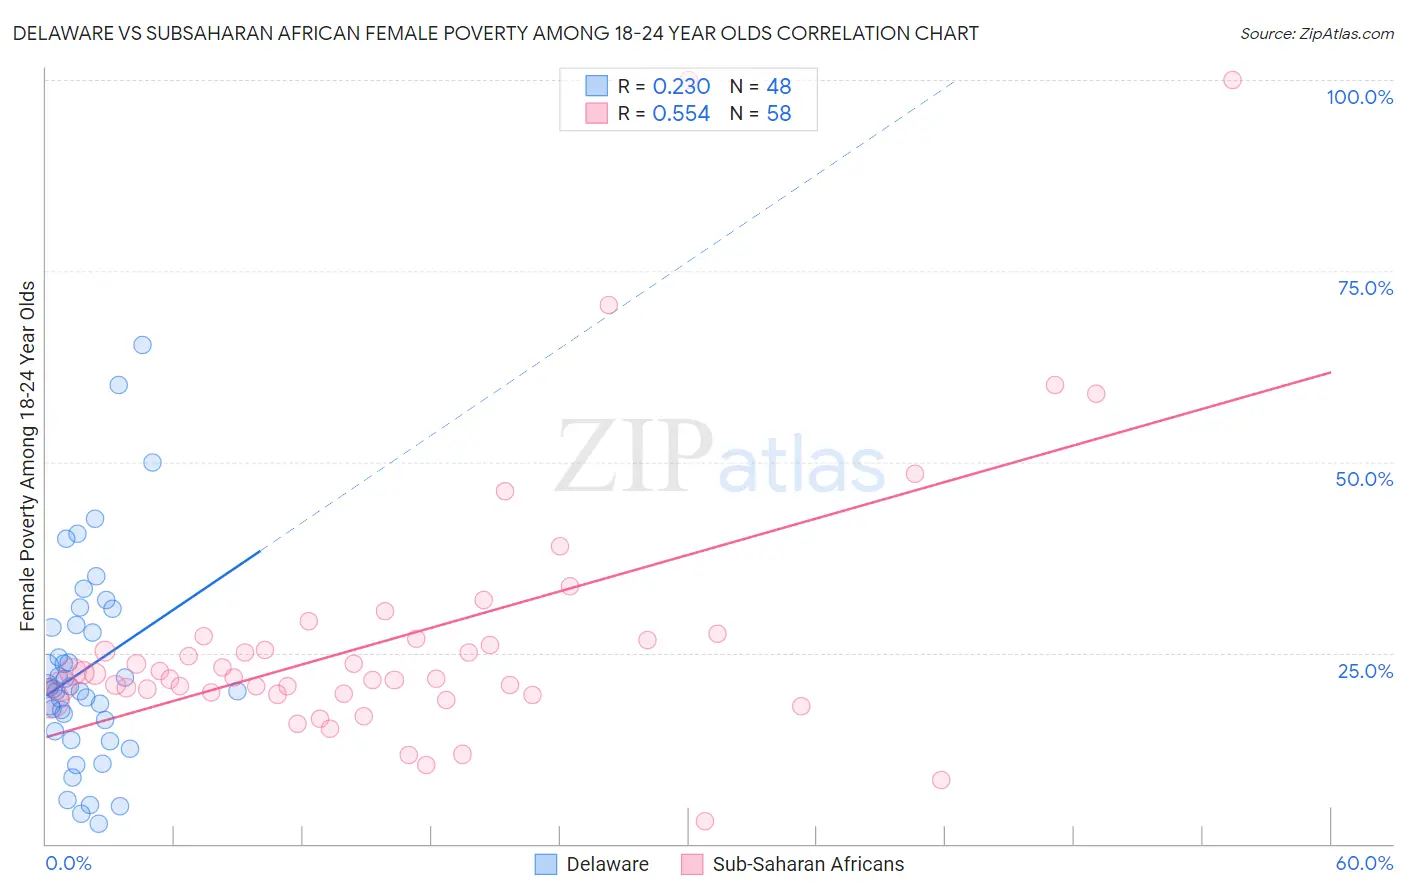 Delaware vs Subsaharan African Female Poverty Among 18-24 Year Olds